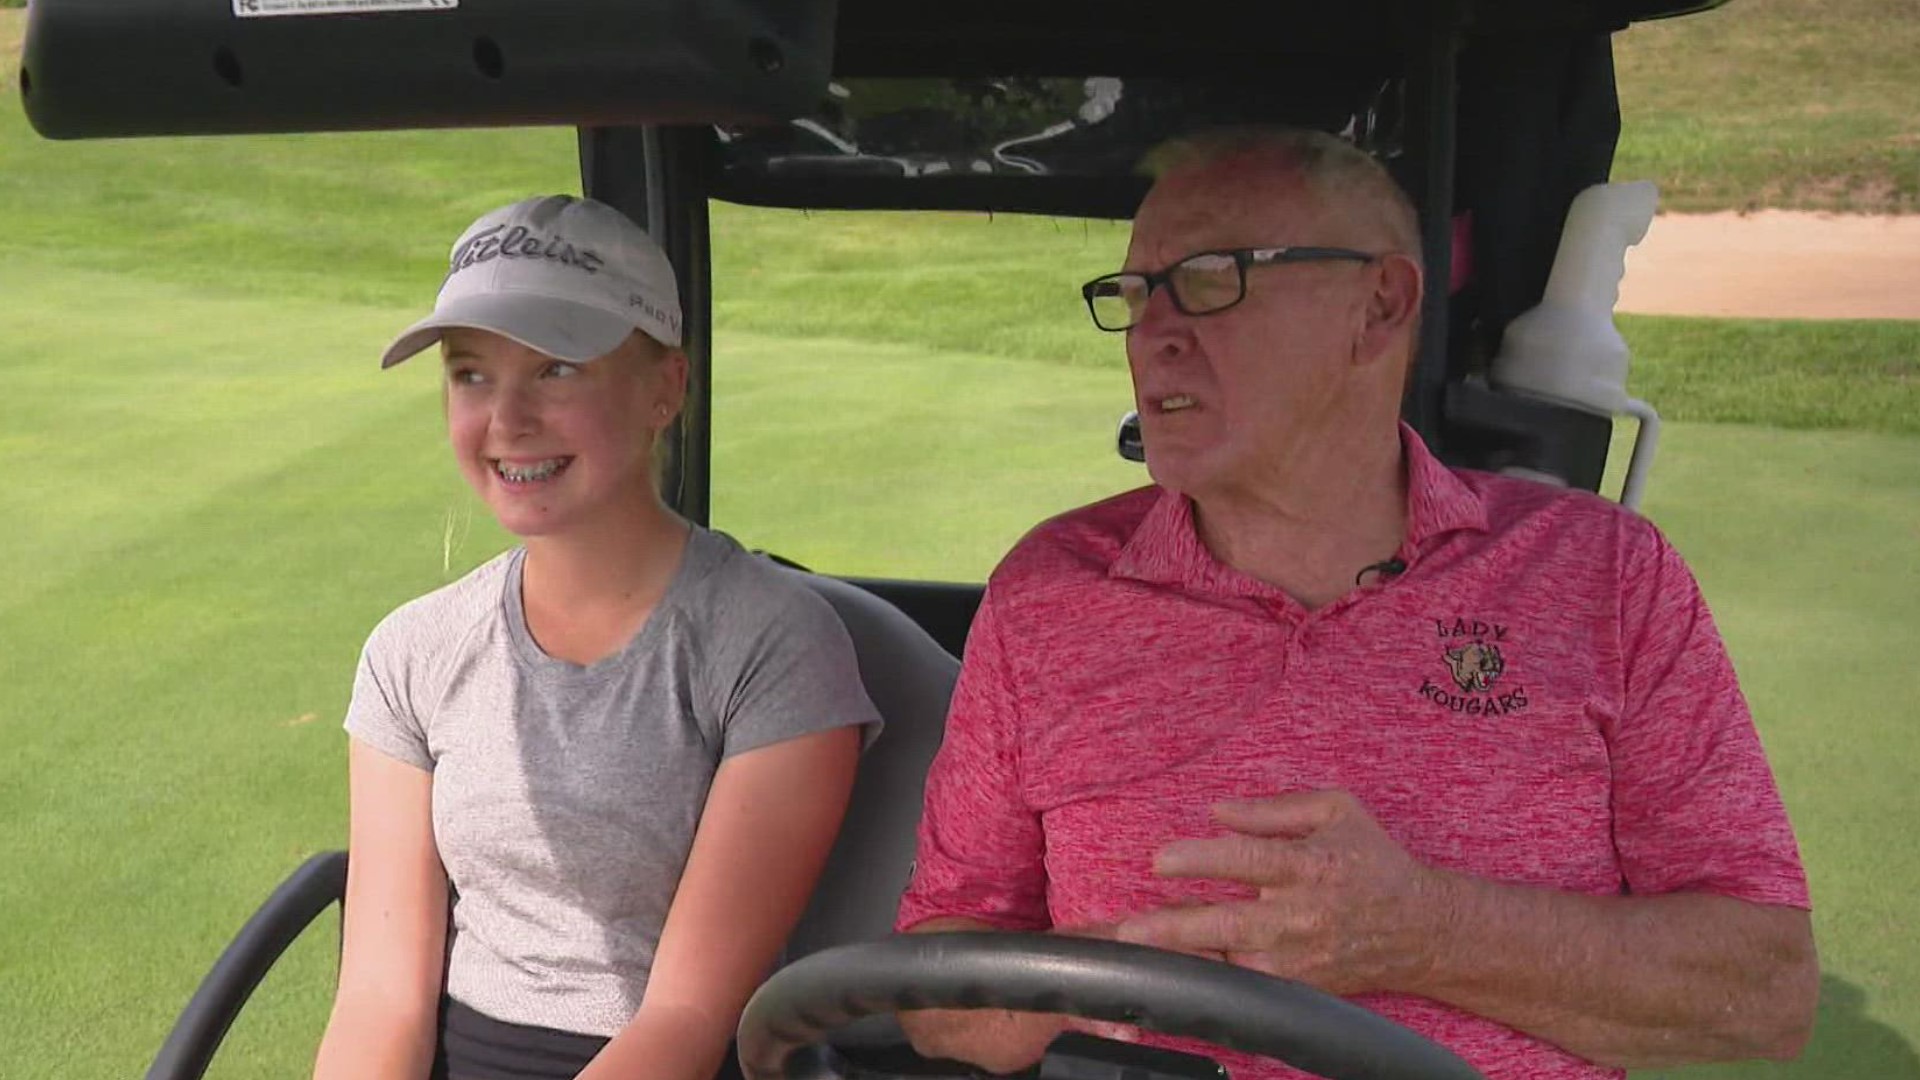 Eighty-year-old Ron Stanton is making history with the girls' golf team at Kankakee Valley High School and has no plans to retire just yet.